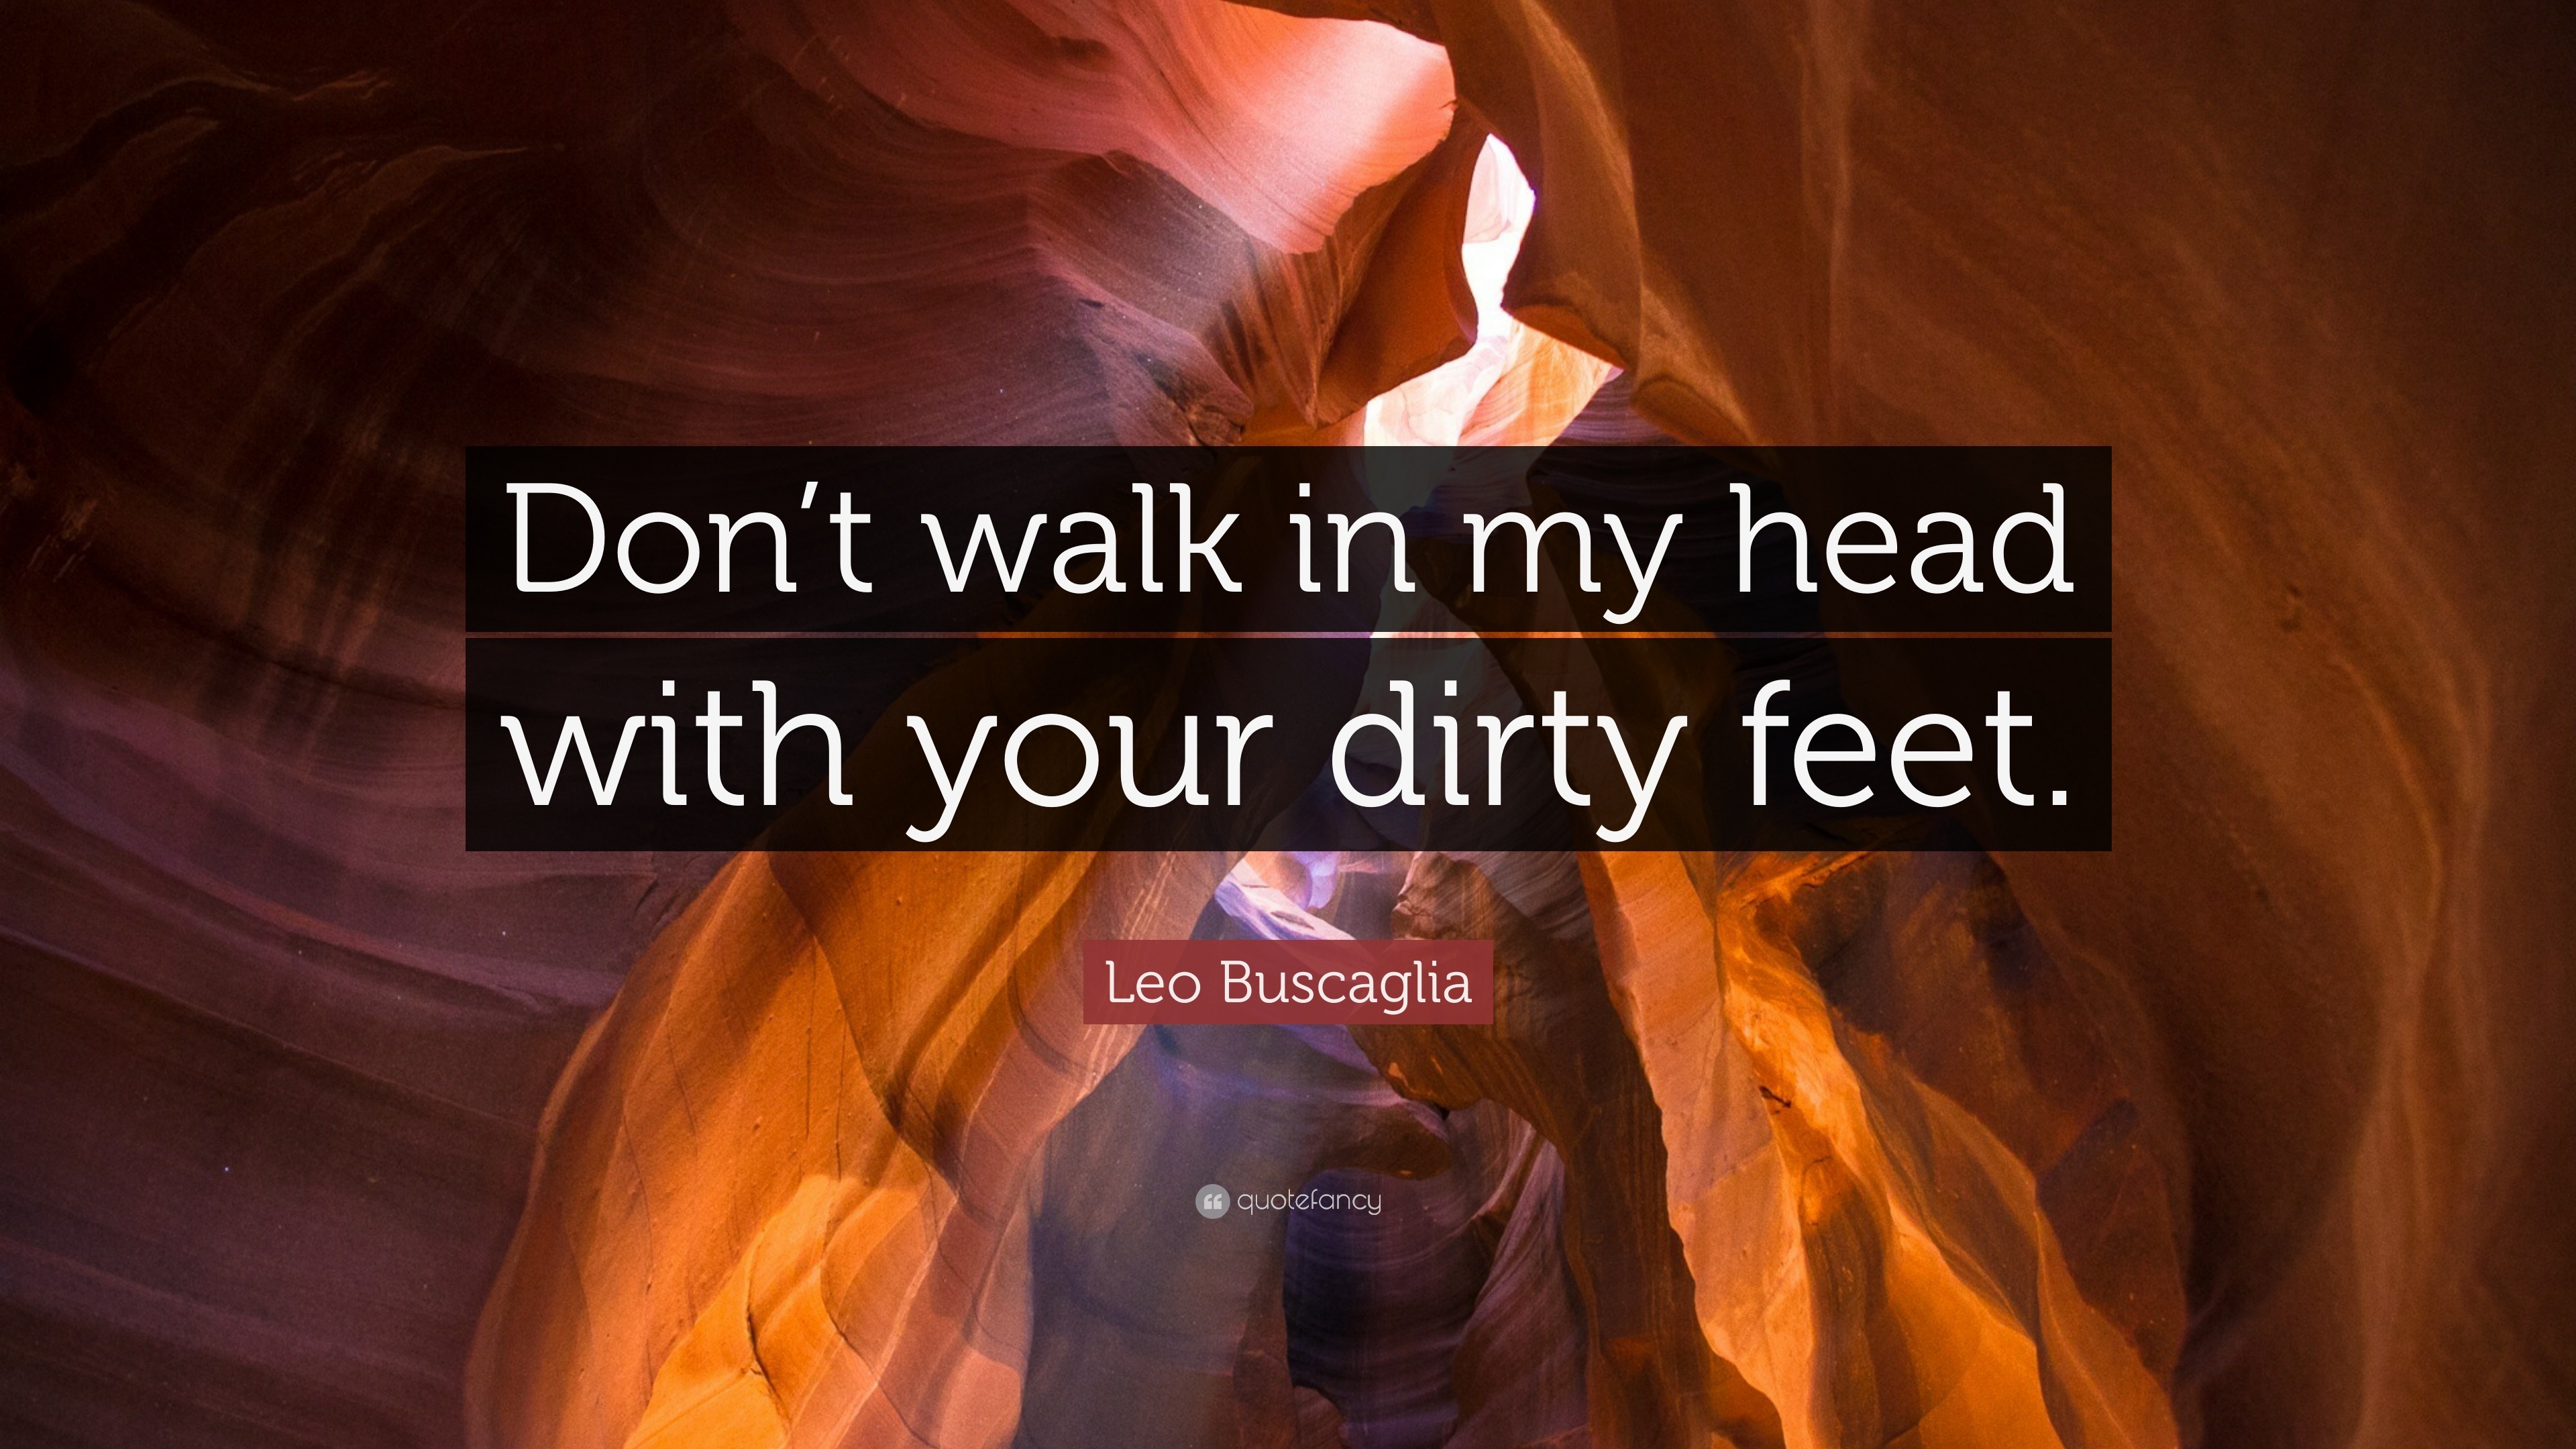 leo buscaglia quote: "don"t walk in my head with your dirty feet